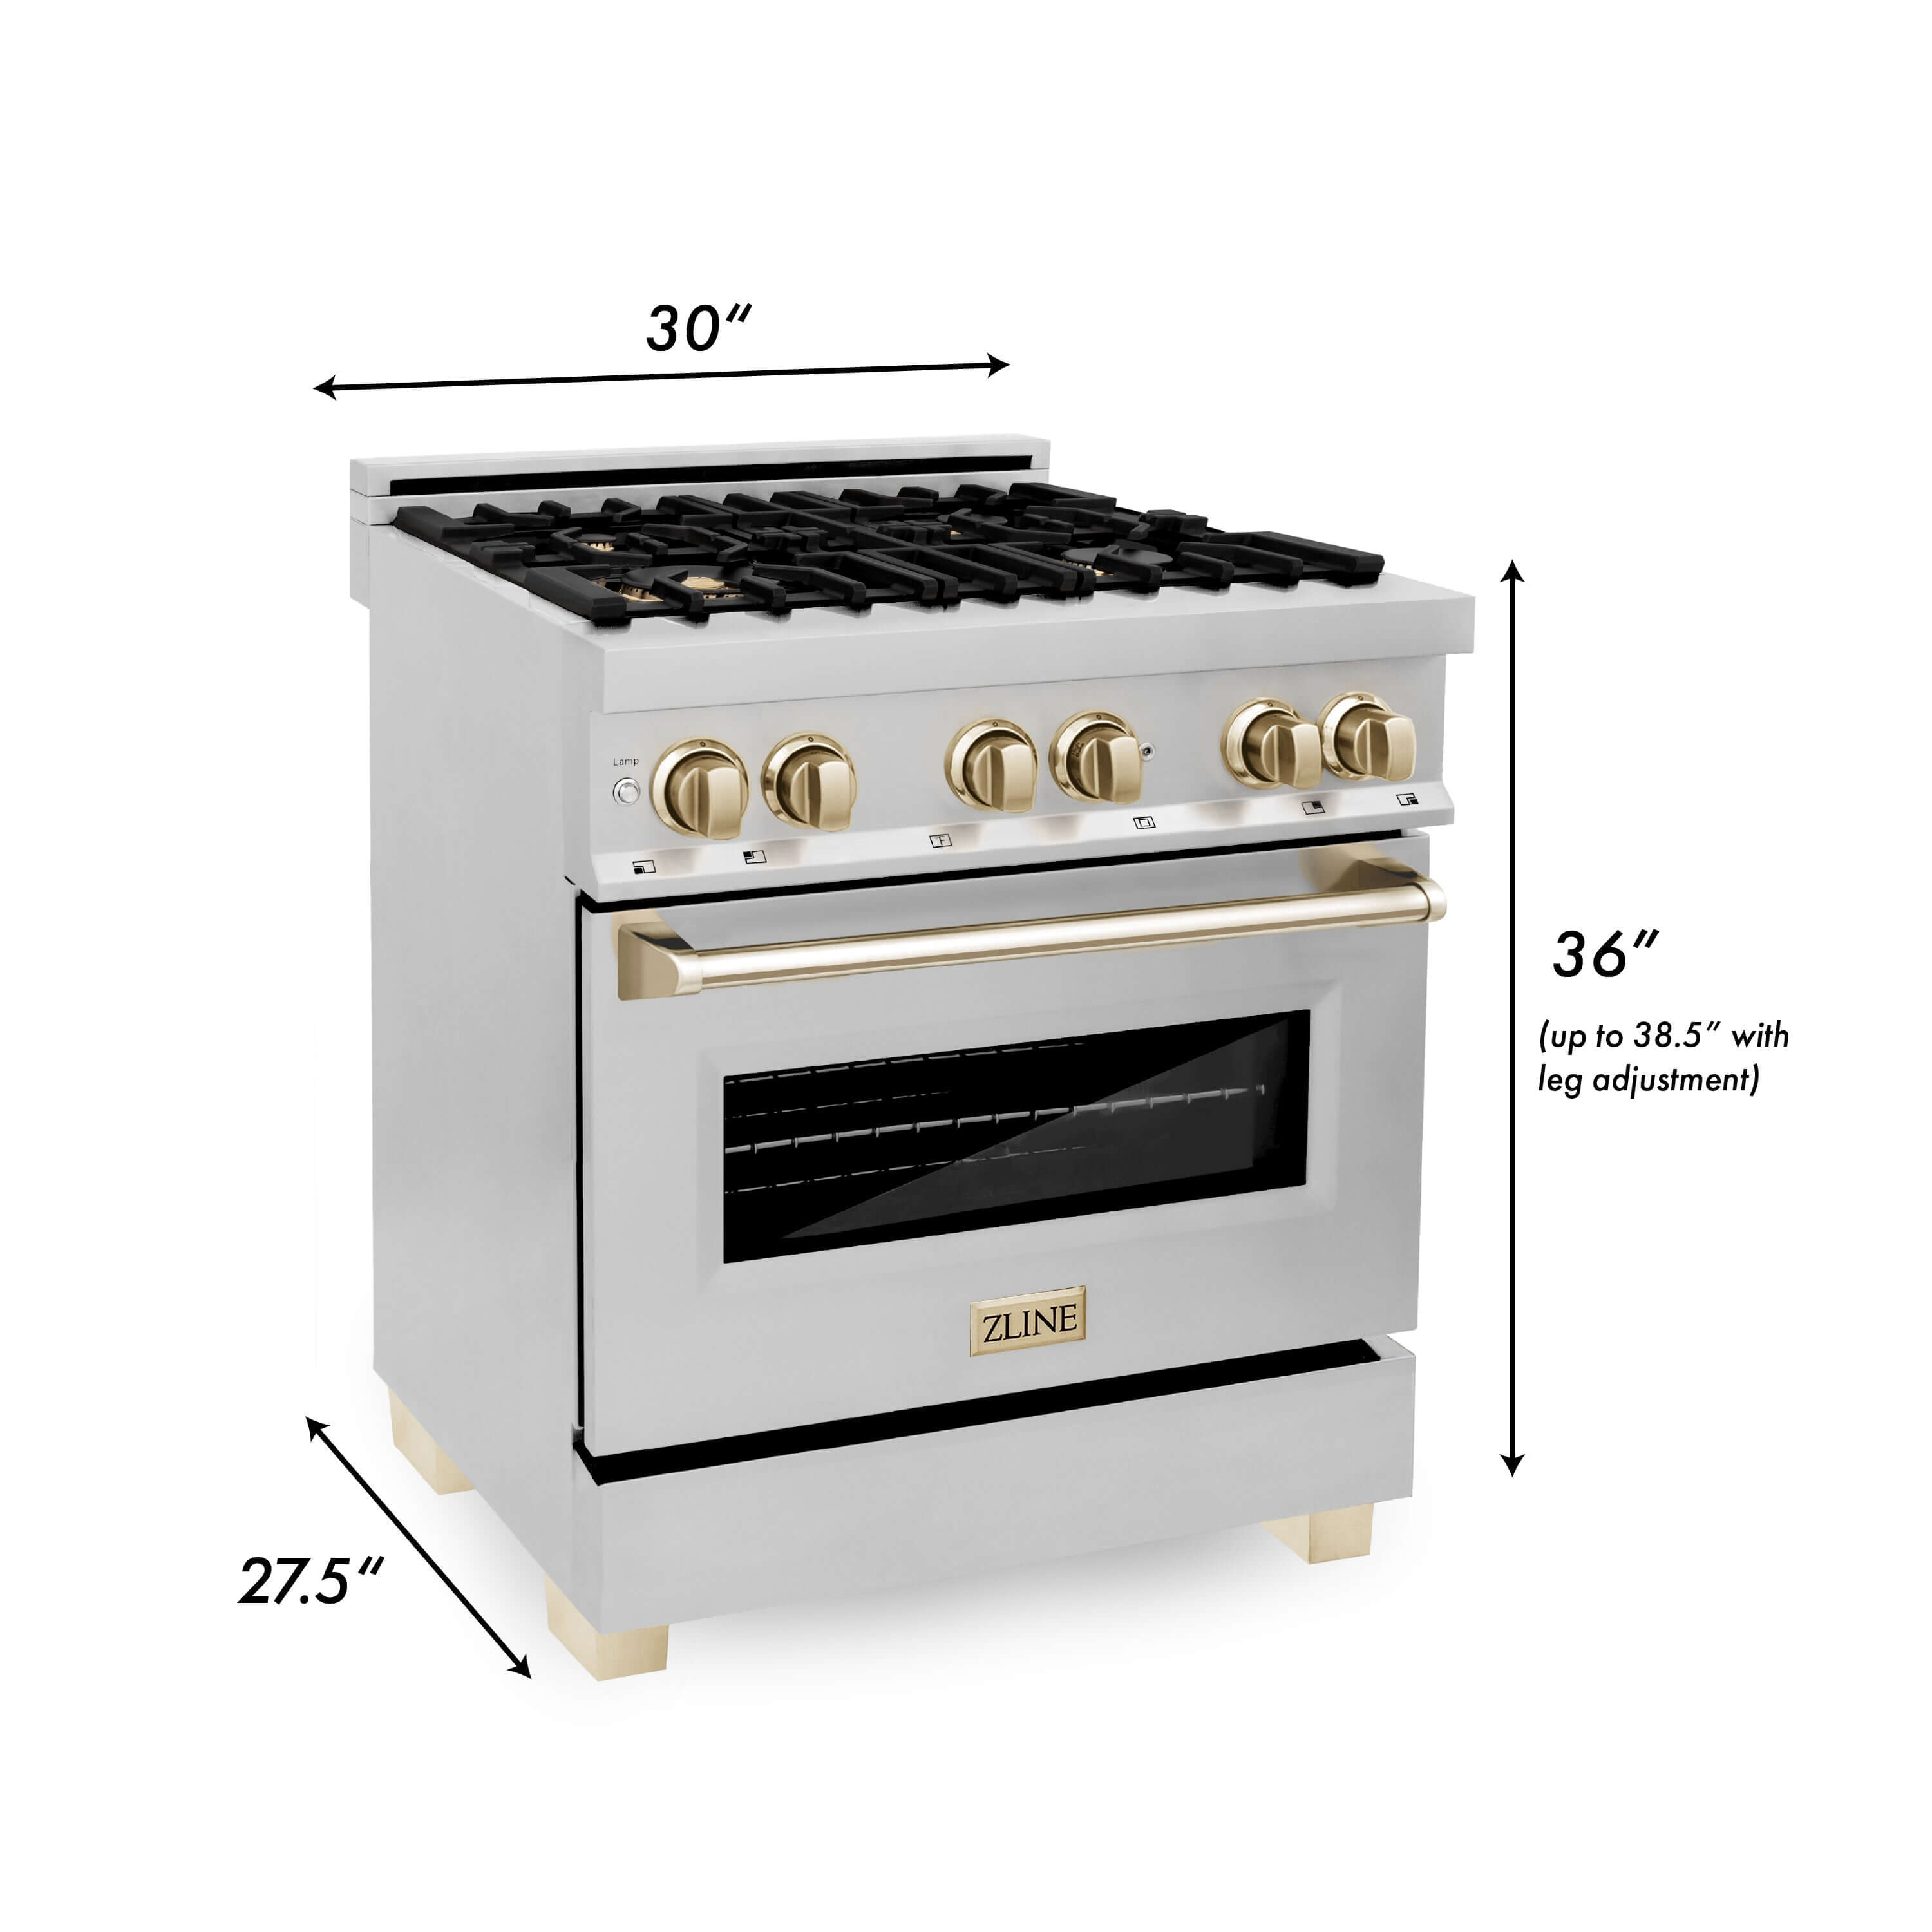 ZLINE Autograph Edition 30 in. Kitchen Package with Stainless Steel Dual Fuel Range, Range Hood, Dishwasher and French Door Refrigerator with External Water Dispenser with Polished Gold Accents (4AKPR-RARHDWM30-G) dimensional diagram with measurements.